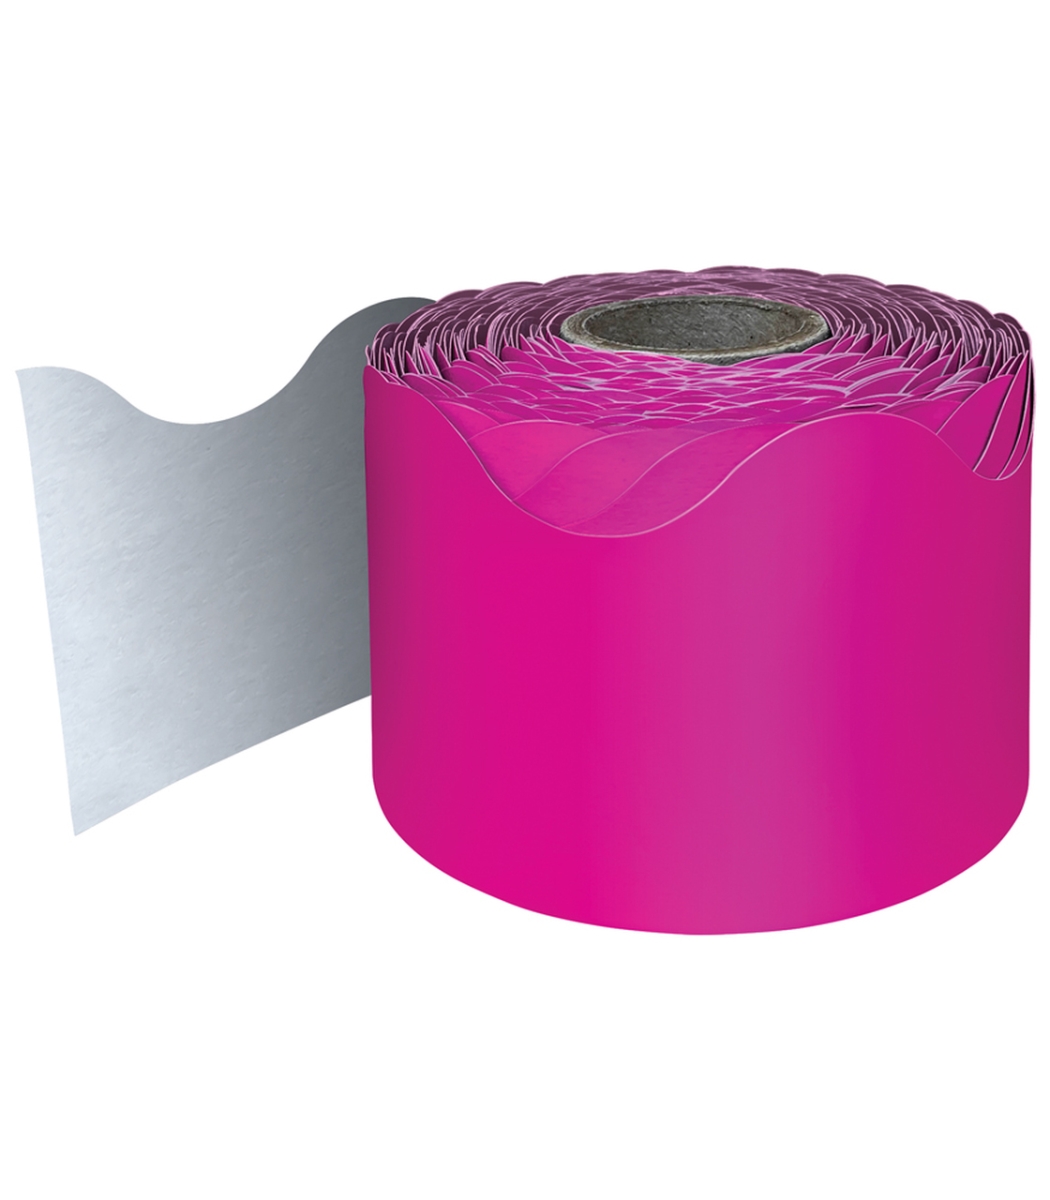 Picture of Carson Dellosa Education CD-108470-3 Rolled Scalloped Borders, Hot Pink - 3 Roll